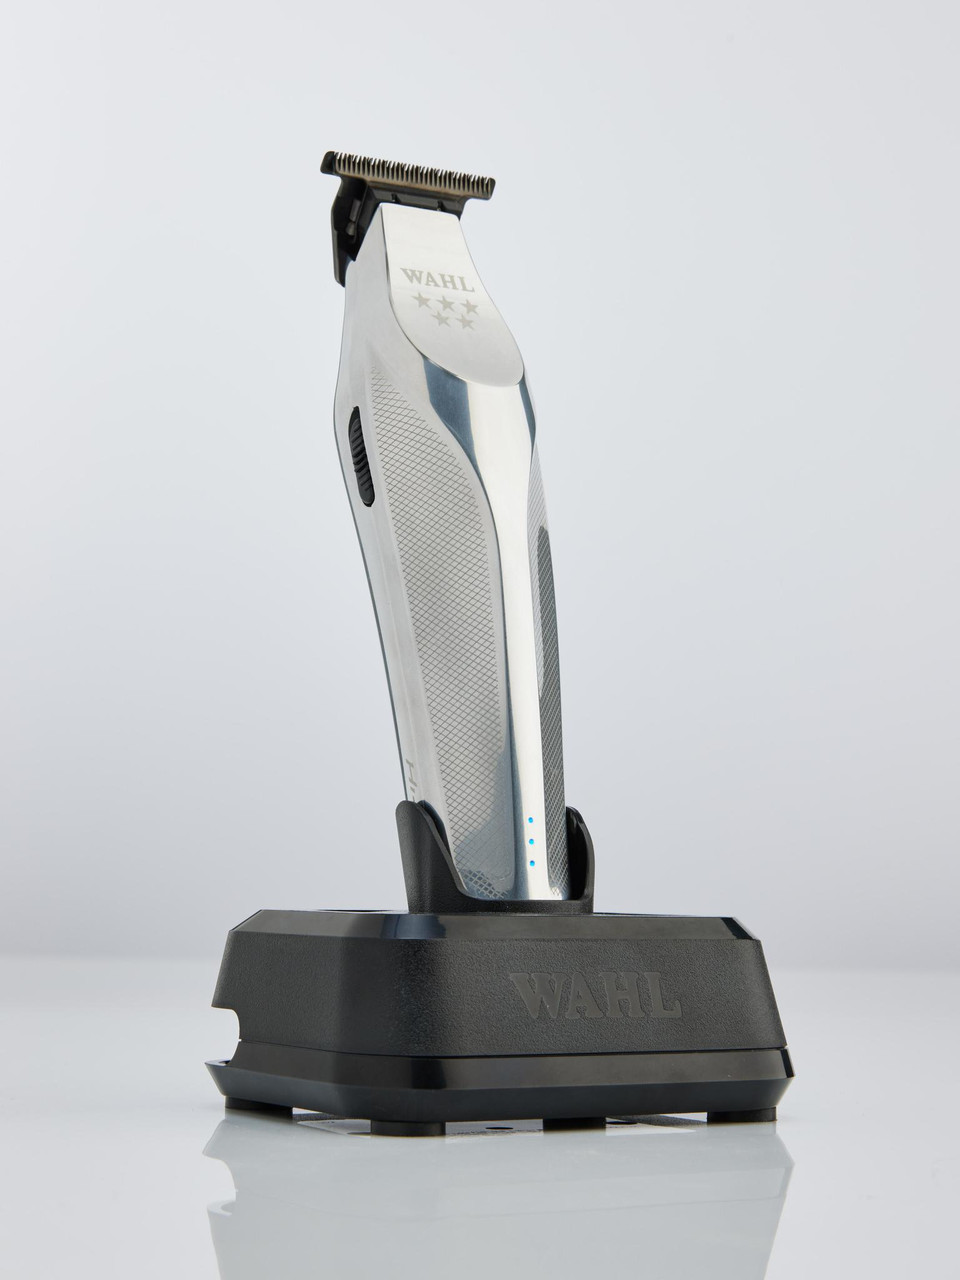 wahl trimmer new